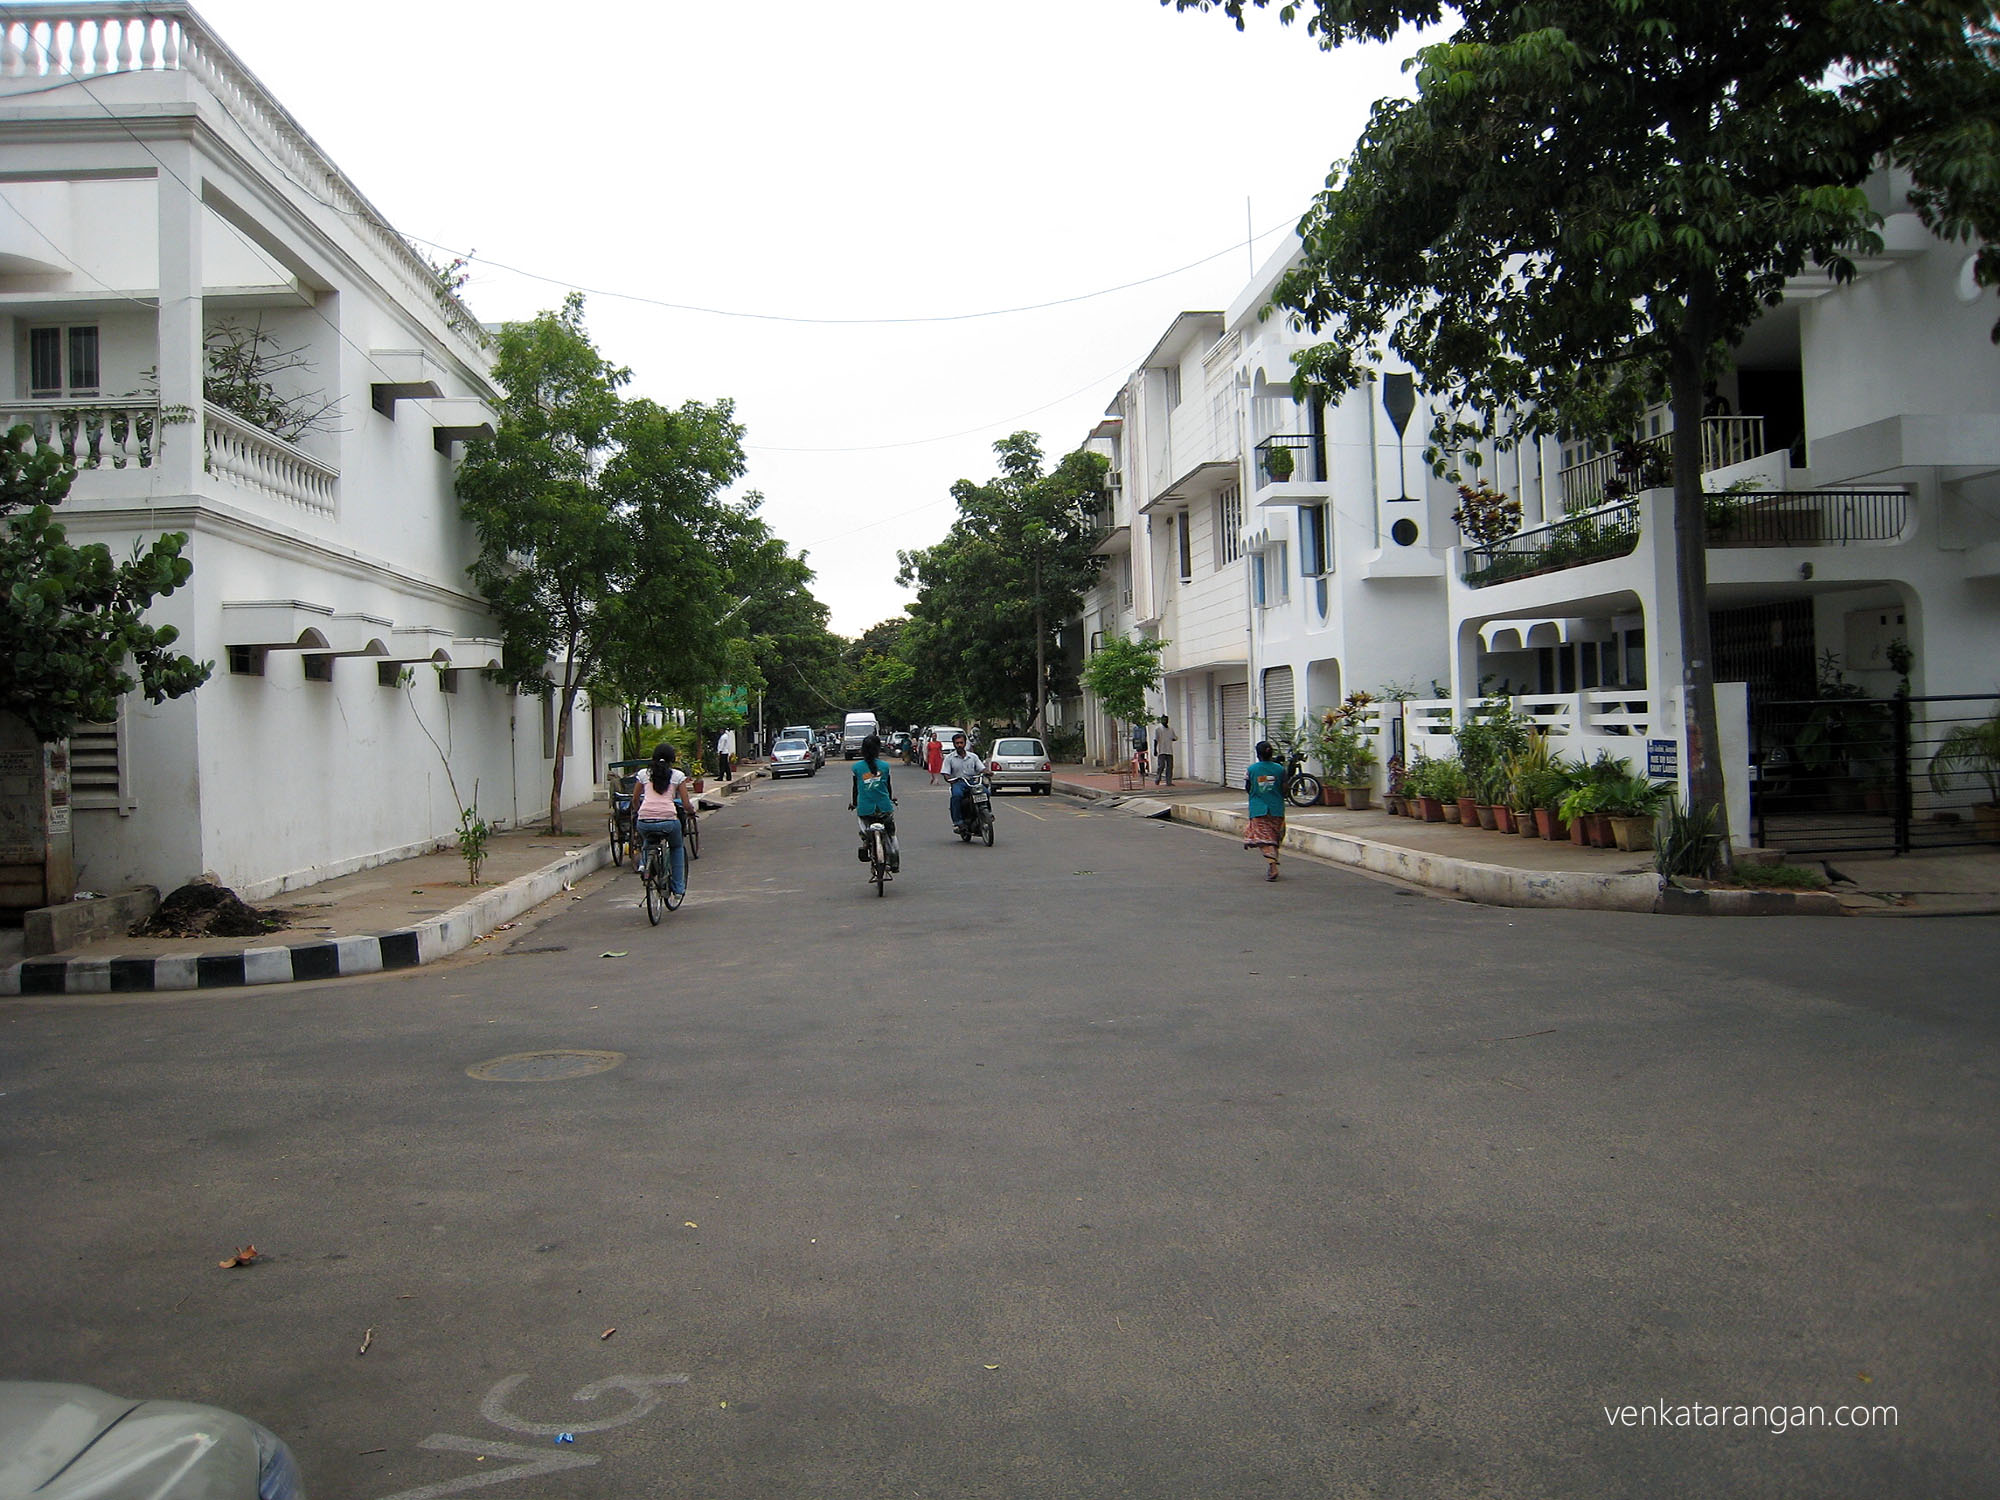 The beautiful french quarters area of Pondicherry with its white buildings on the side lanes of the beach